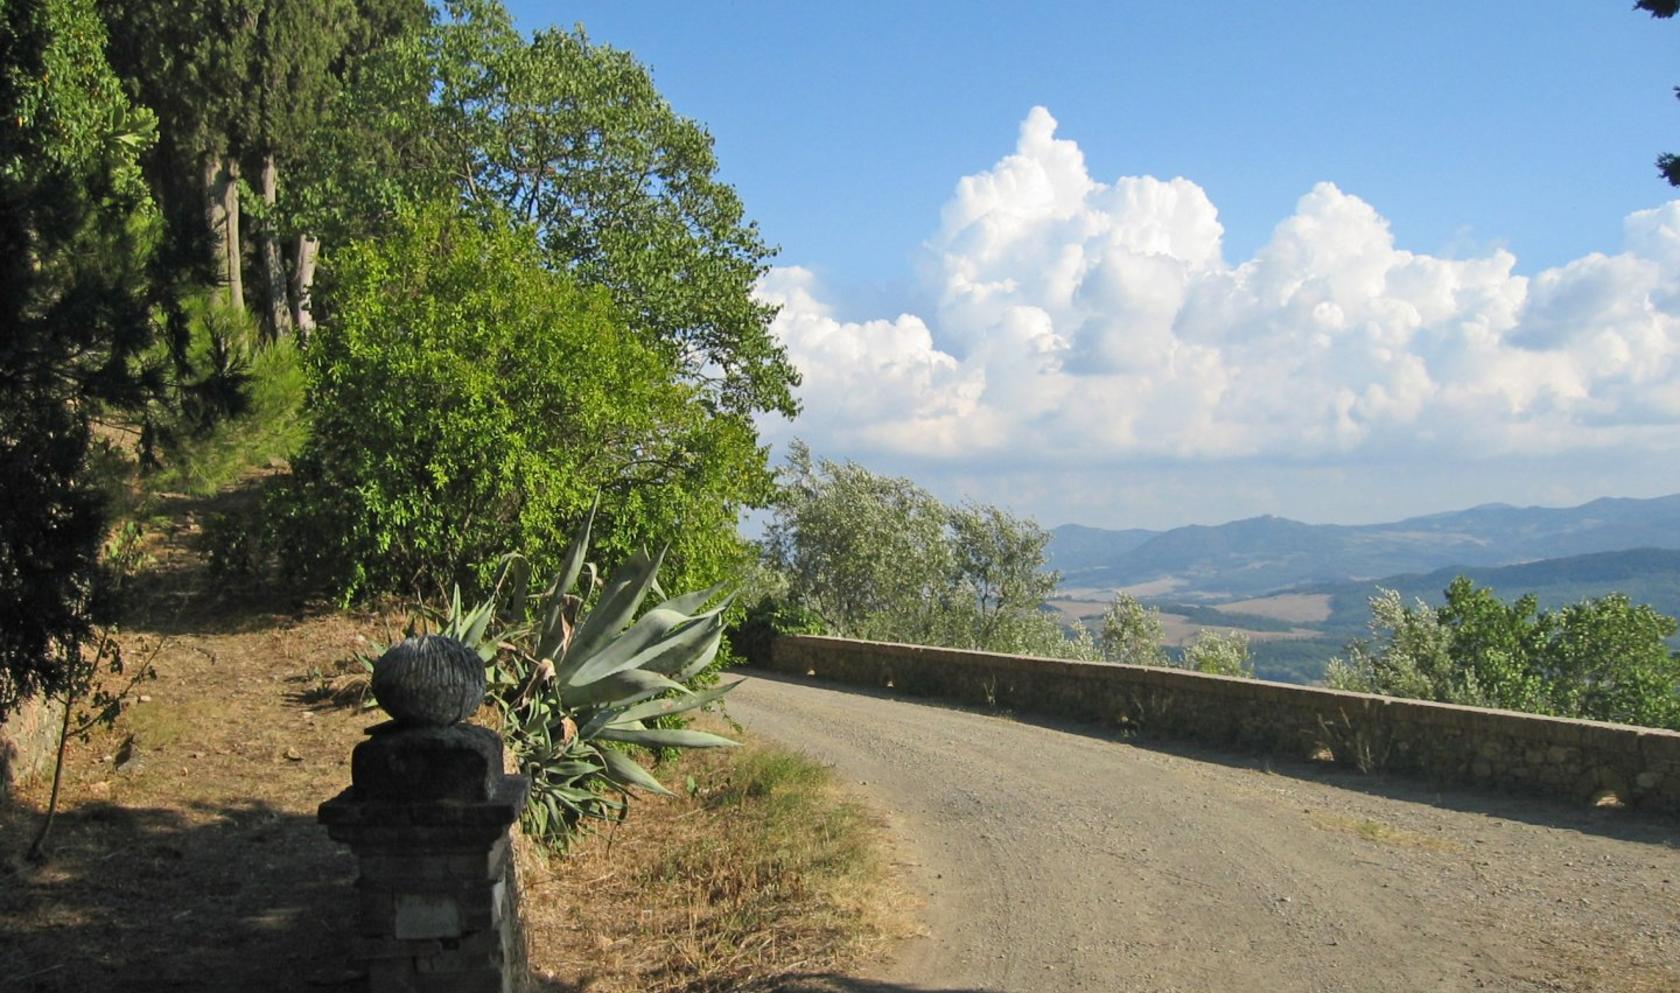 Toscana Immobiliare - The farm estate extends over 43 hectares of land and 